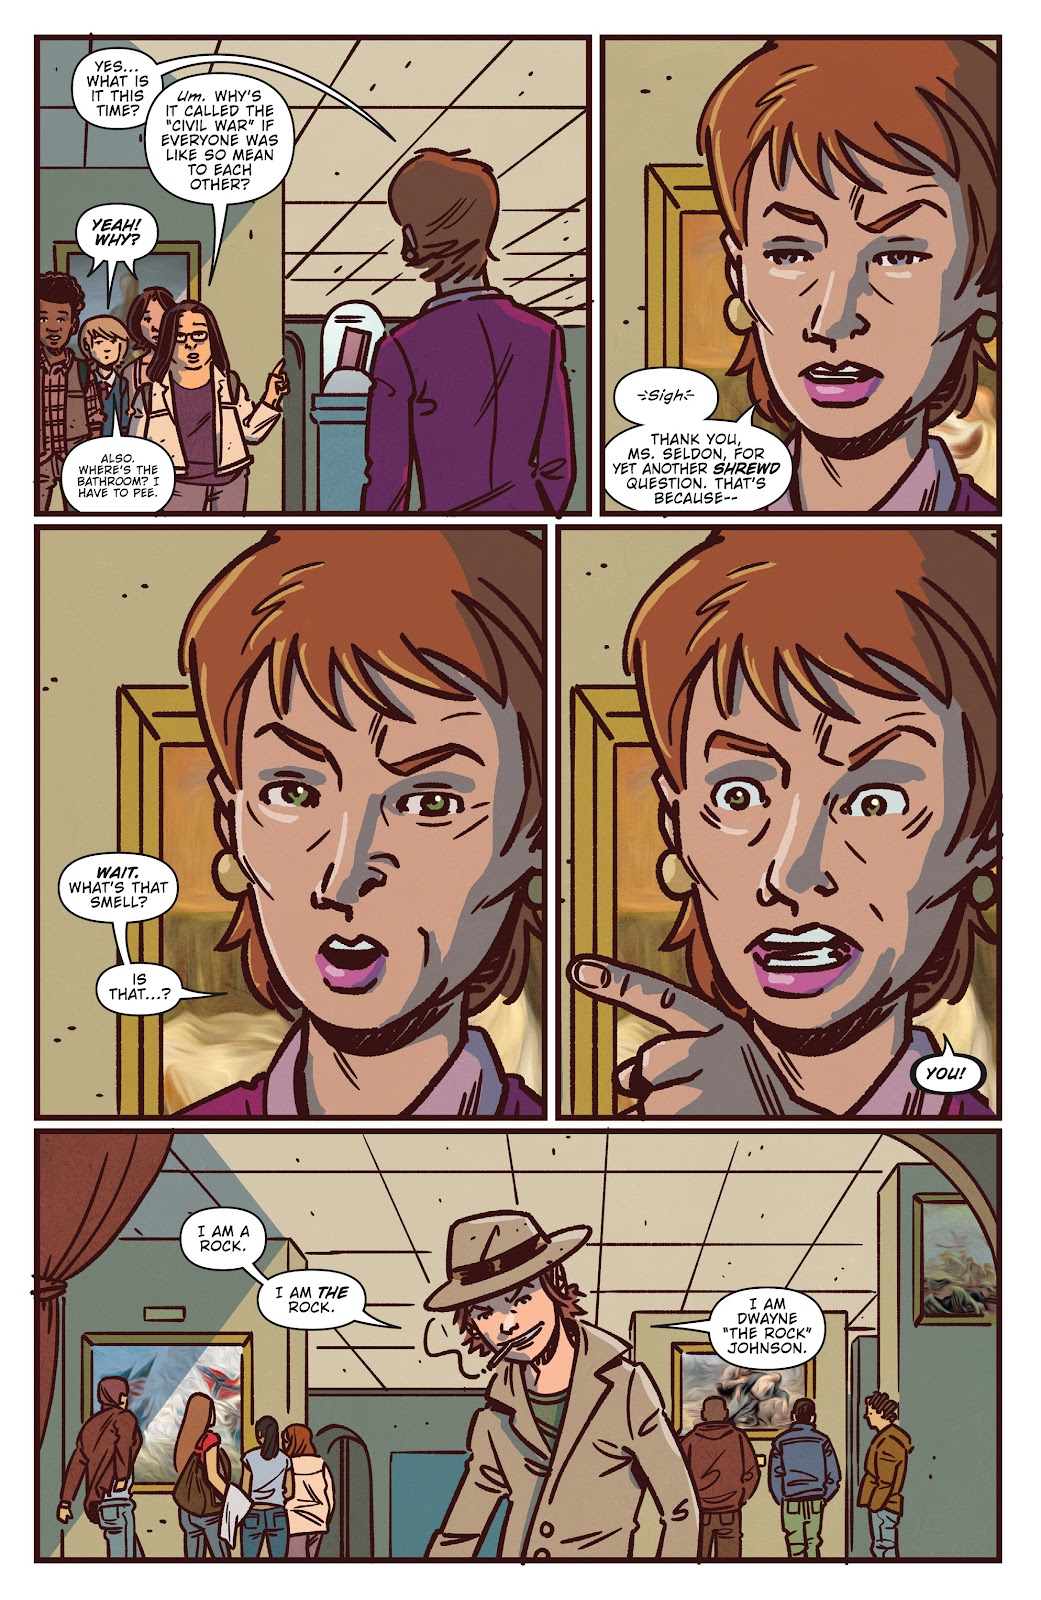 Cult Classic: Return to Whisper issue 2 & 3 - Page 10